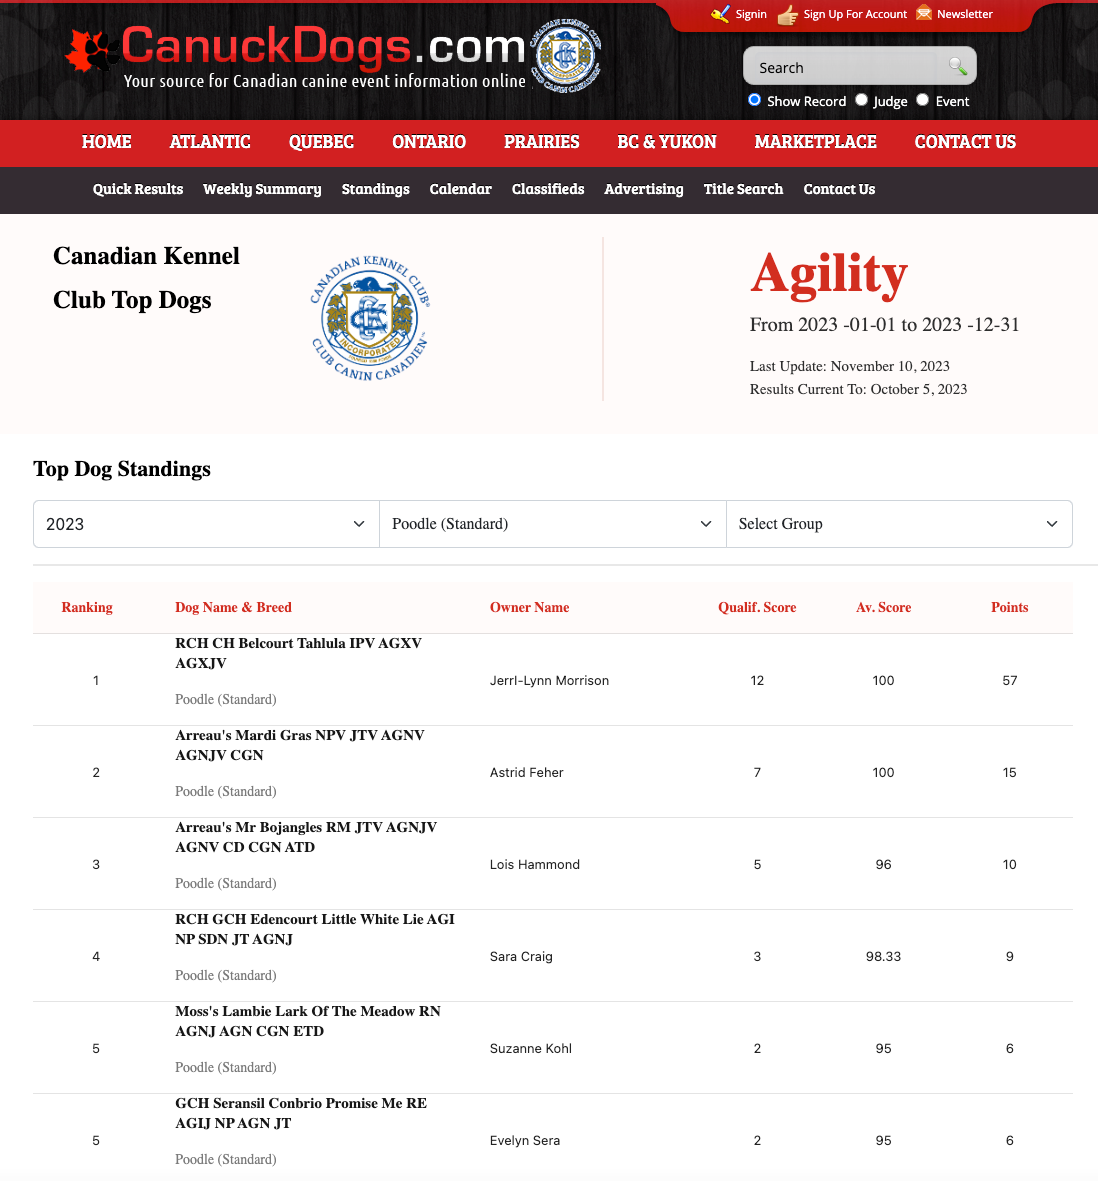 Arreau dogs ranked the #2 and #3 standard poodles in CKC agility for 2023!